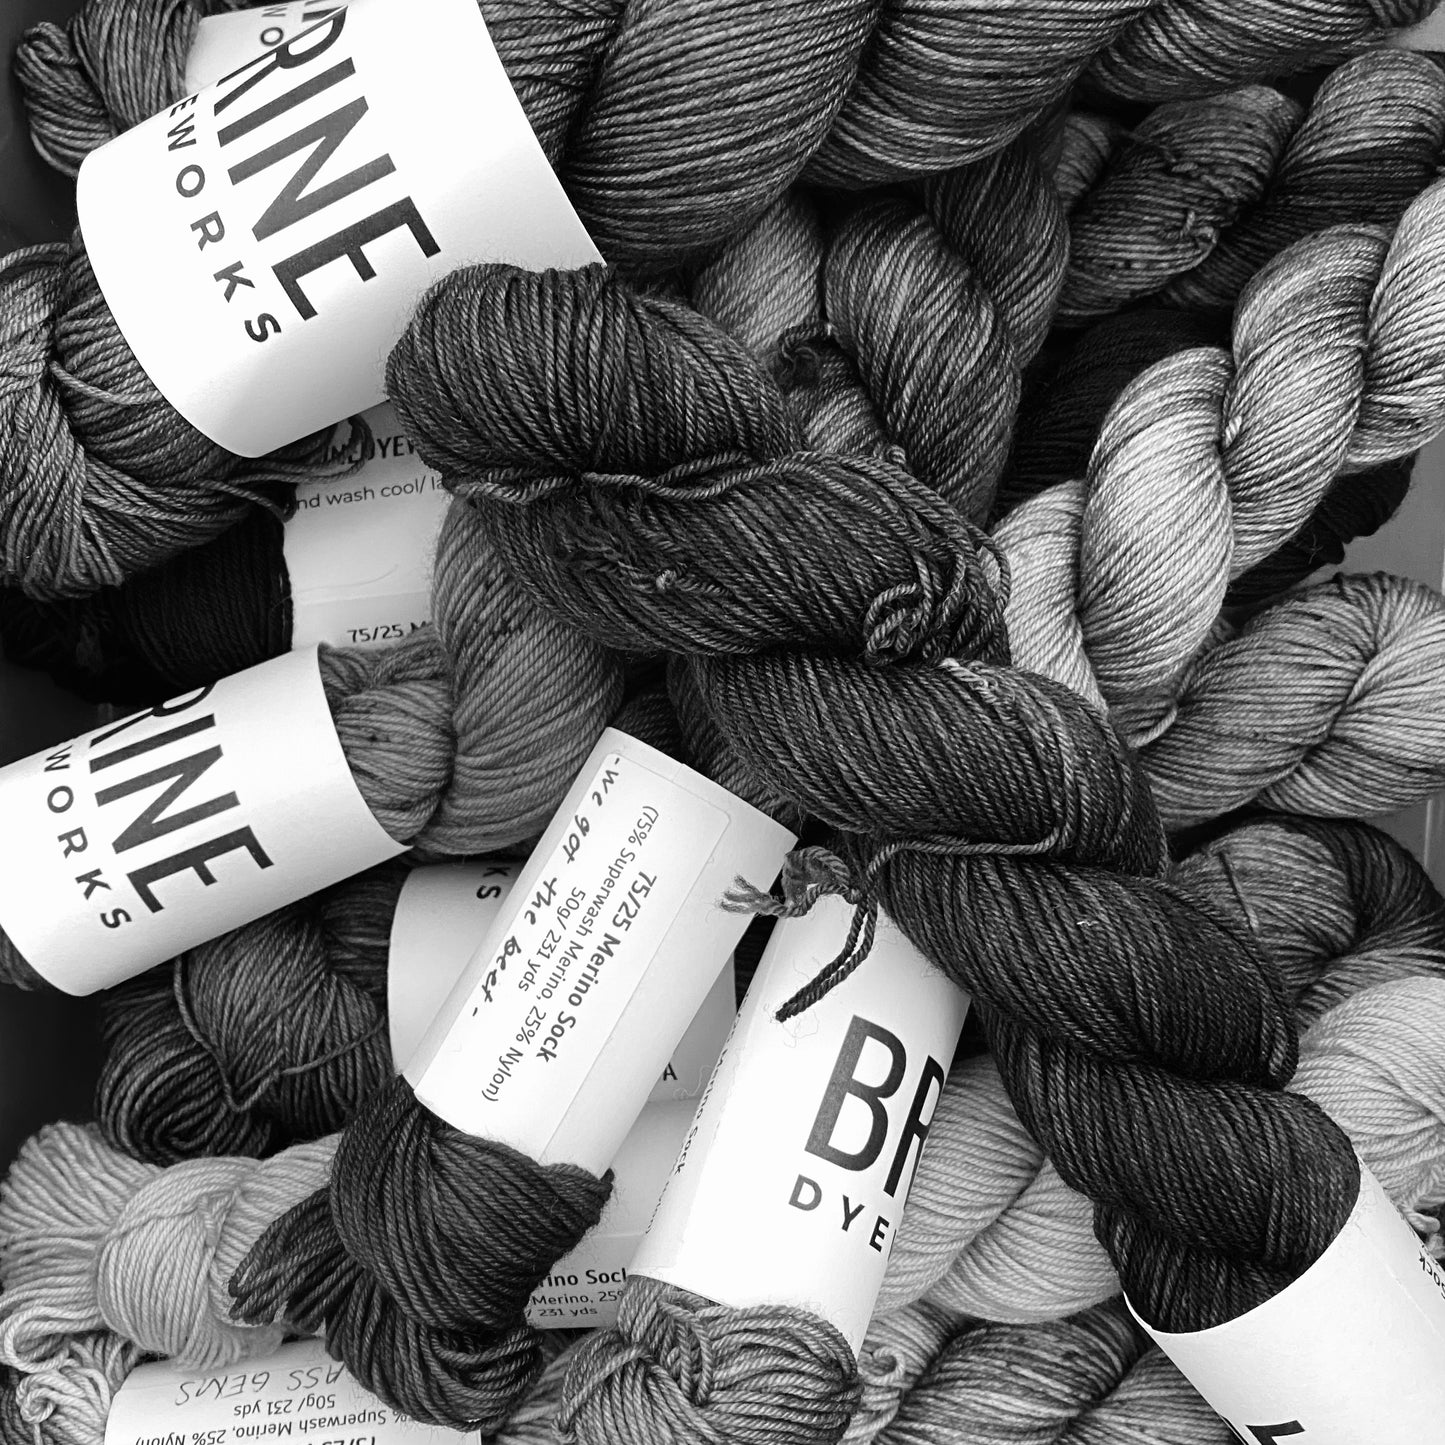 a pile of yarn hanks shown in black and white